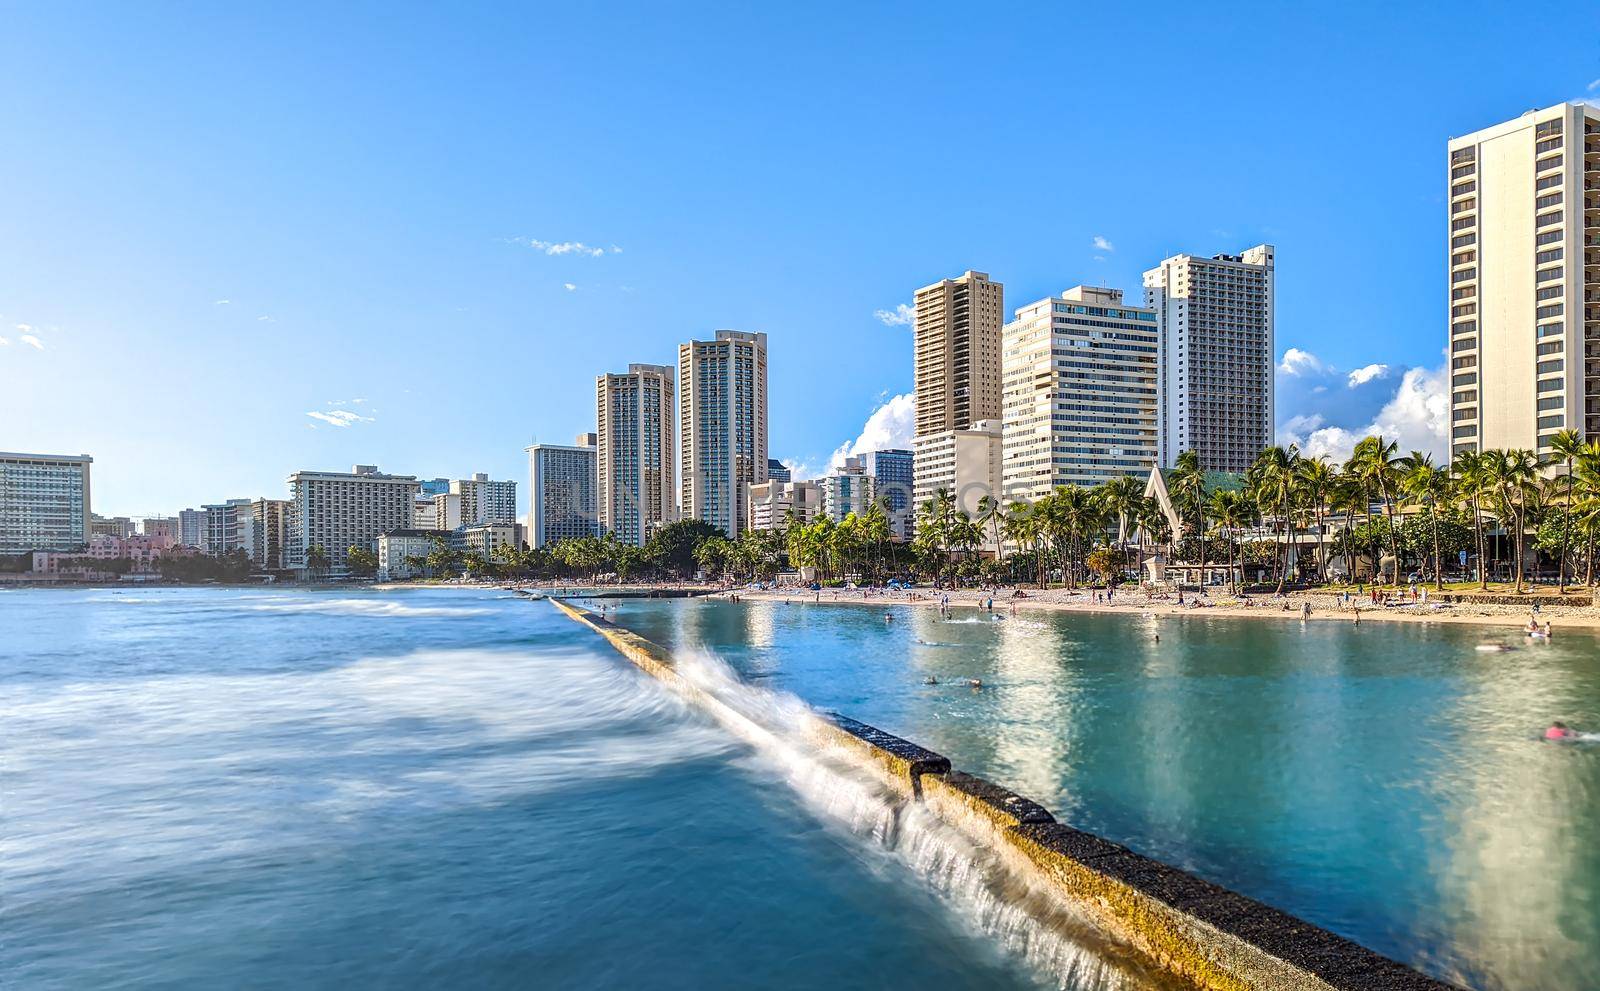 Ocean Water, Waikiki Beach, and Hotel Towers by digidreamgrafix